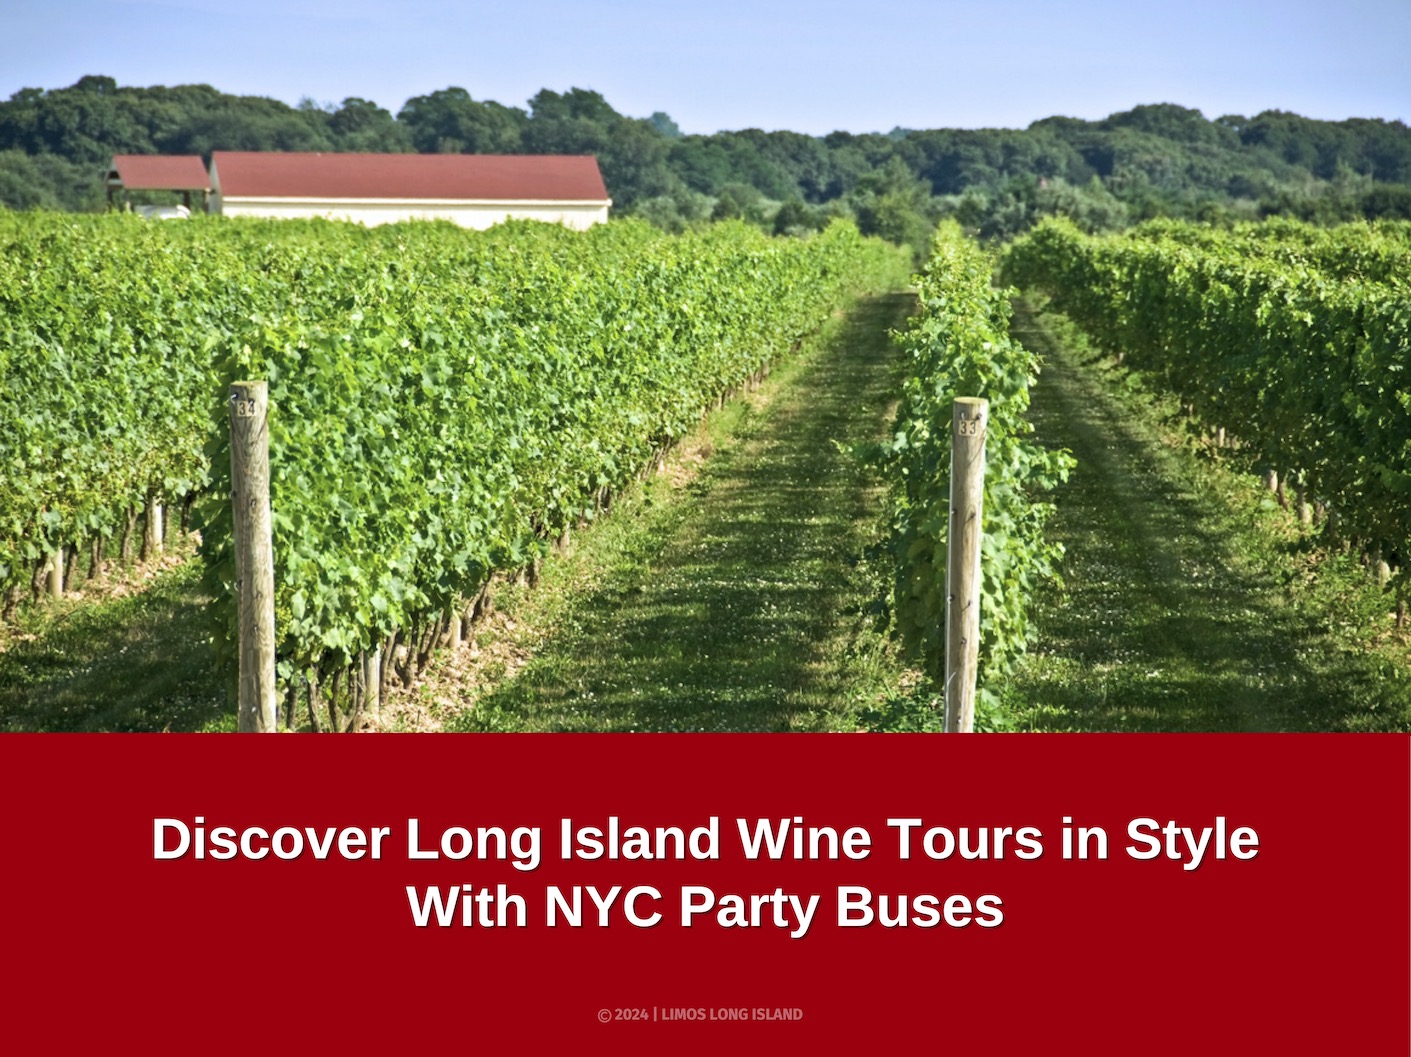 Discover Long Island Wine Tours in Style With NYC Party Buses